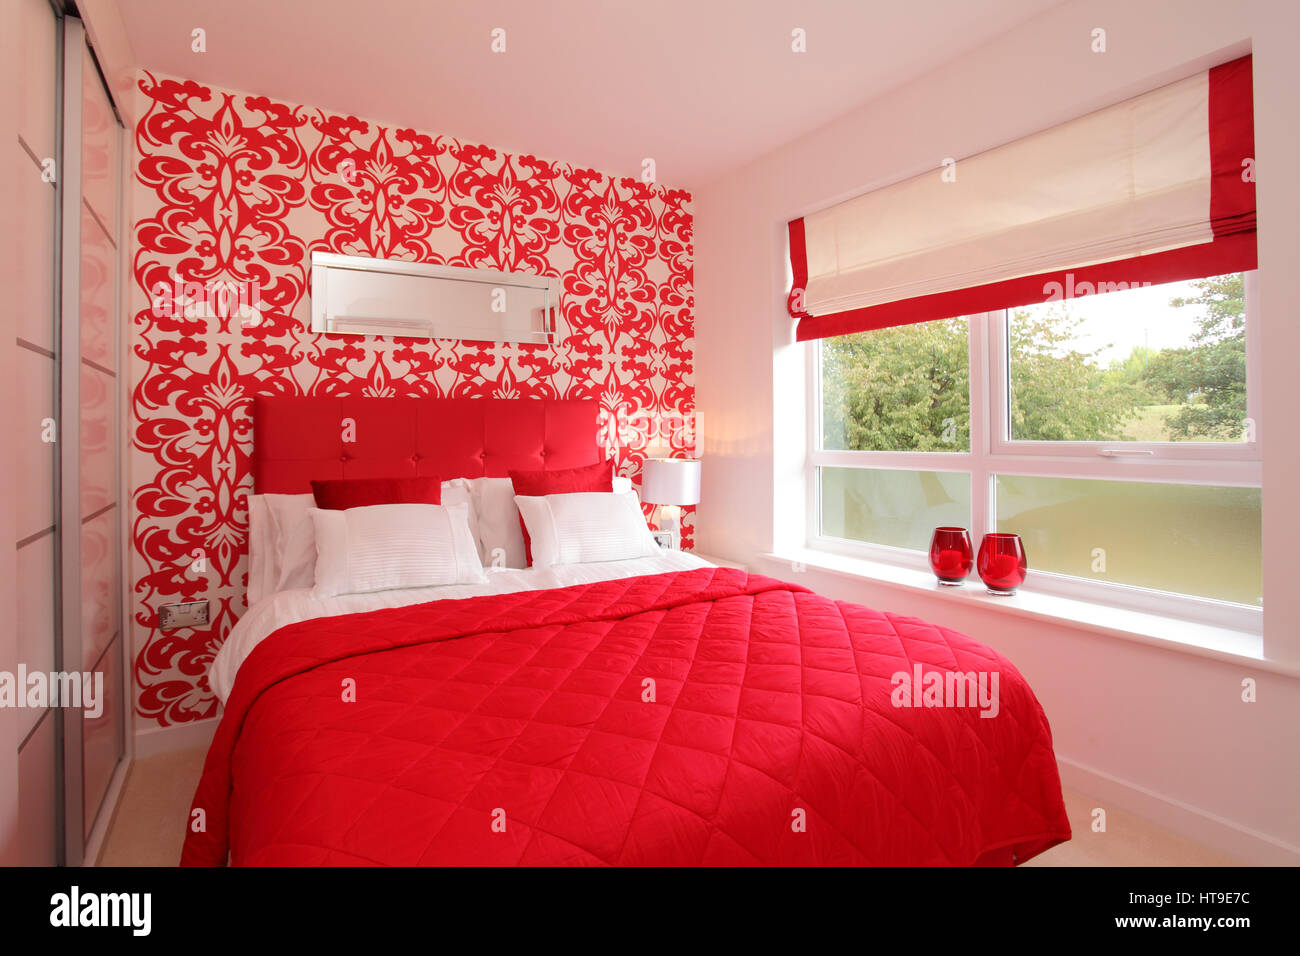 Home interior, bedroom, bright red, decor, bed spread, padded headboard, feature wall, Stock Photo